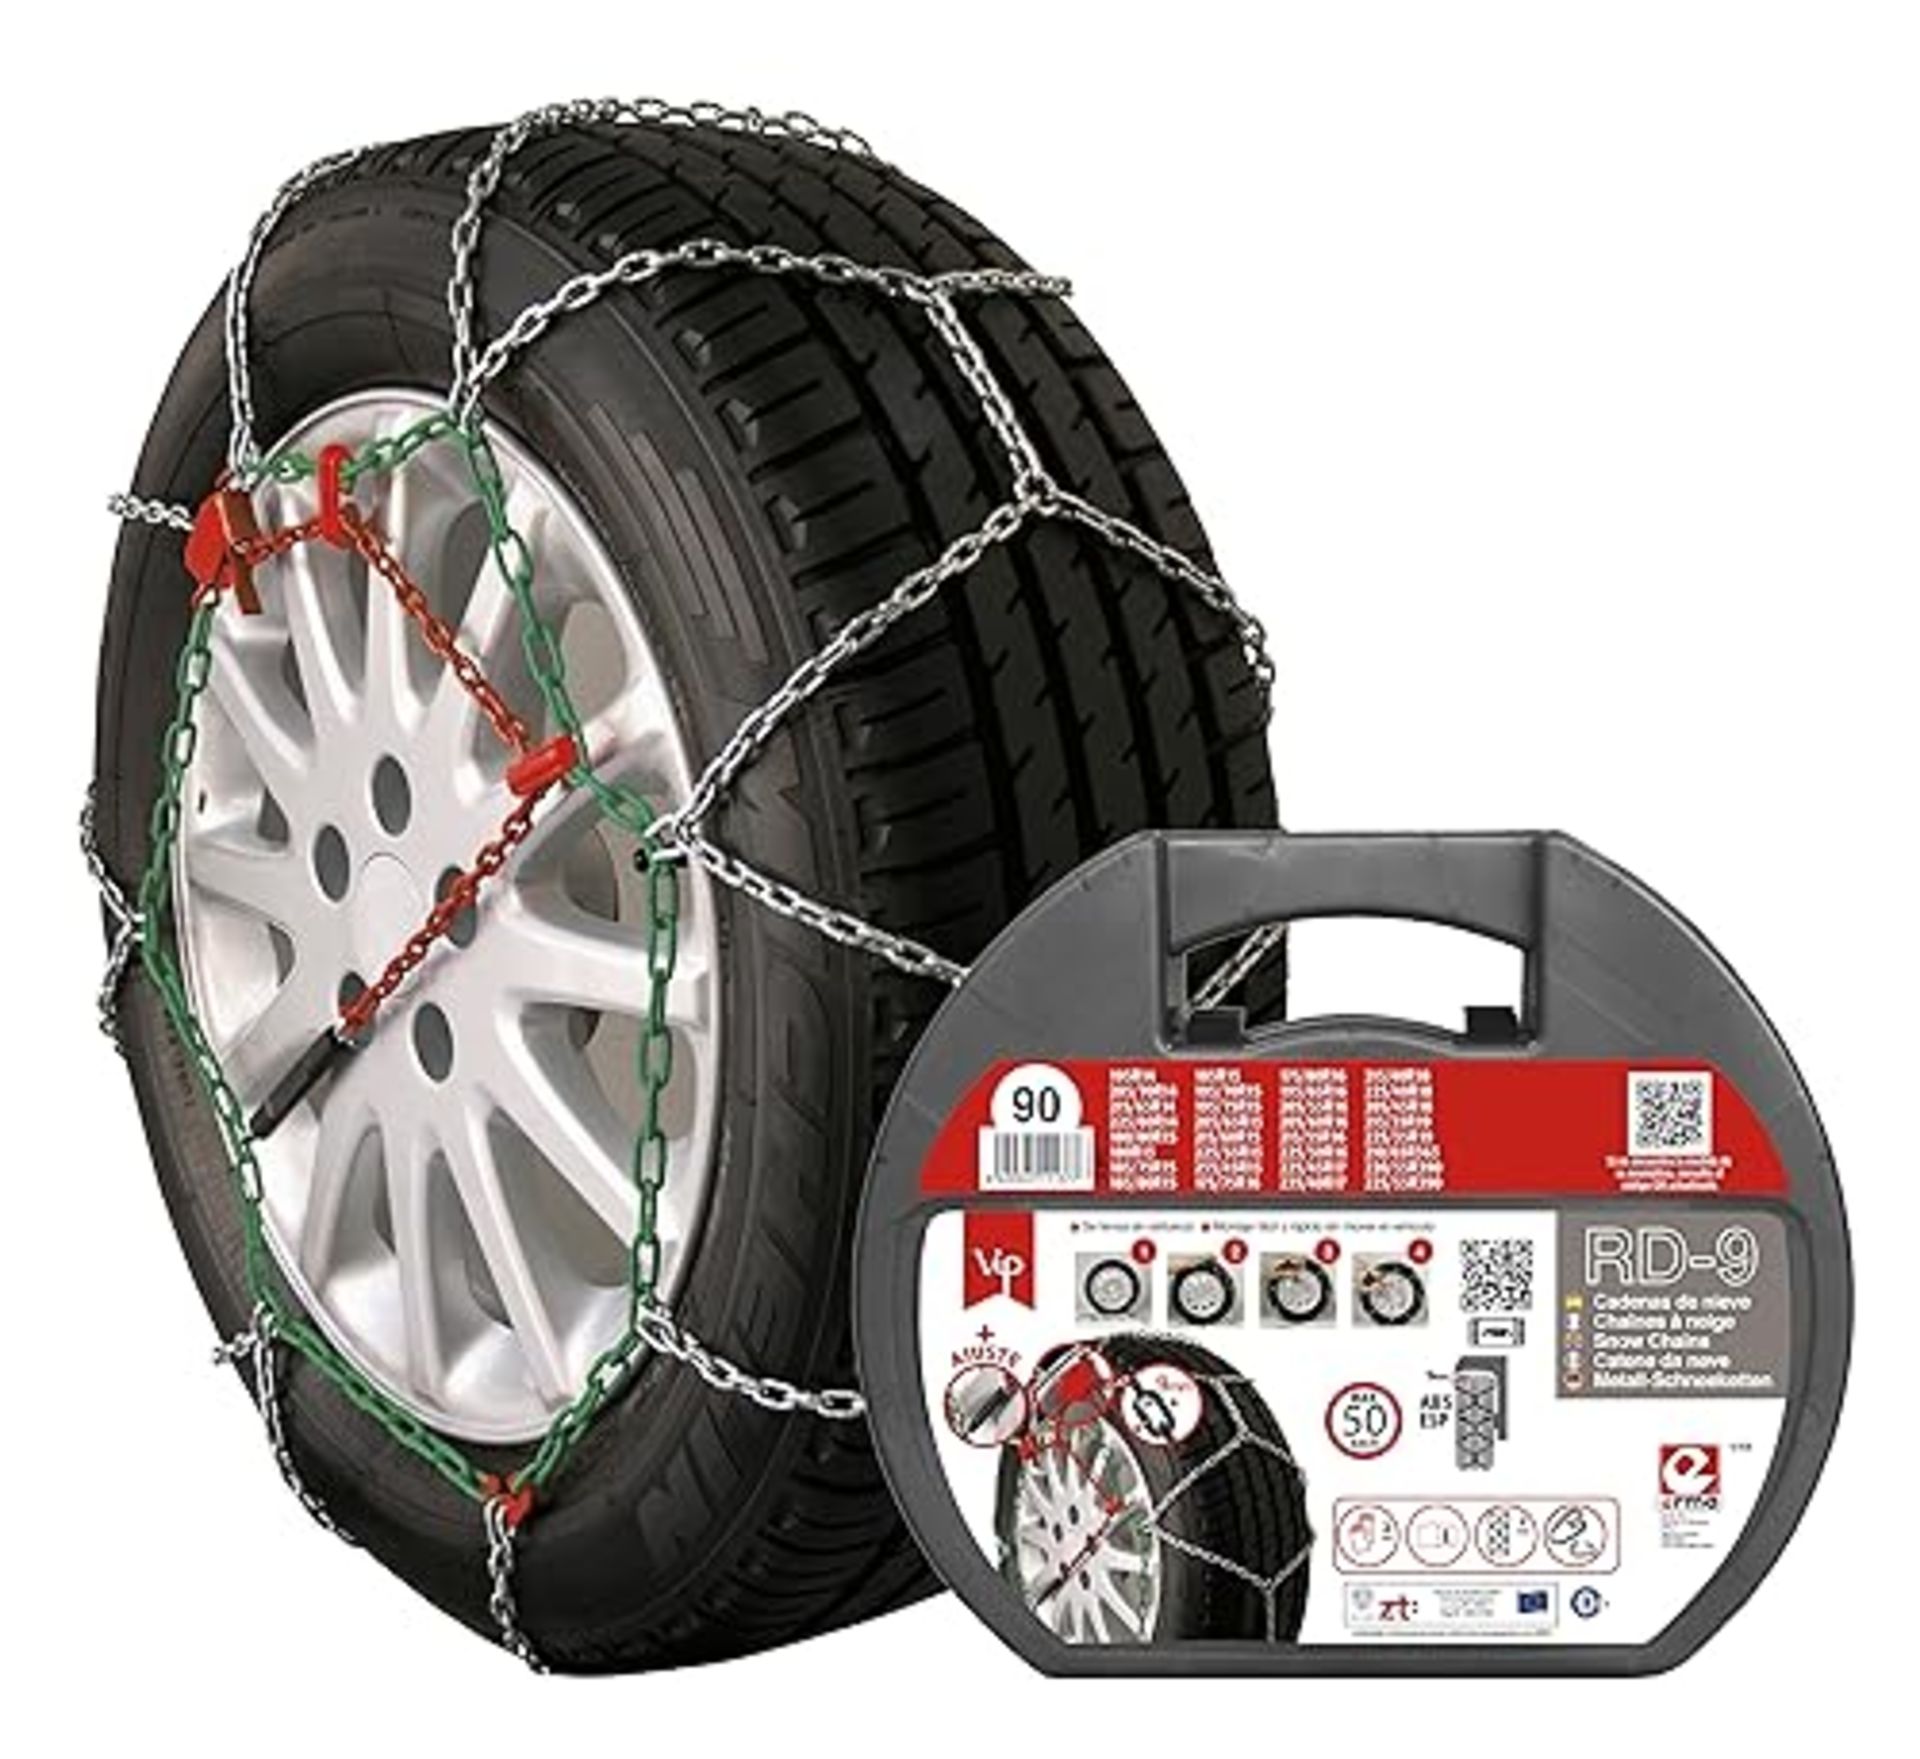 RD9 - Metal snow chains, mm, size No. 90, 2 pieces, including gloves. - Image 4 of 6